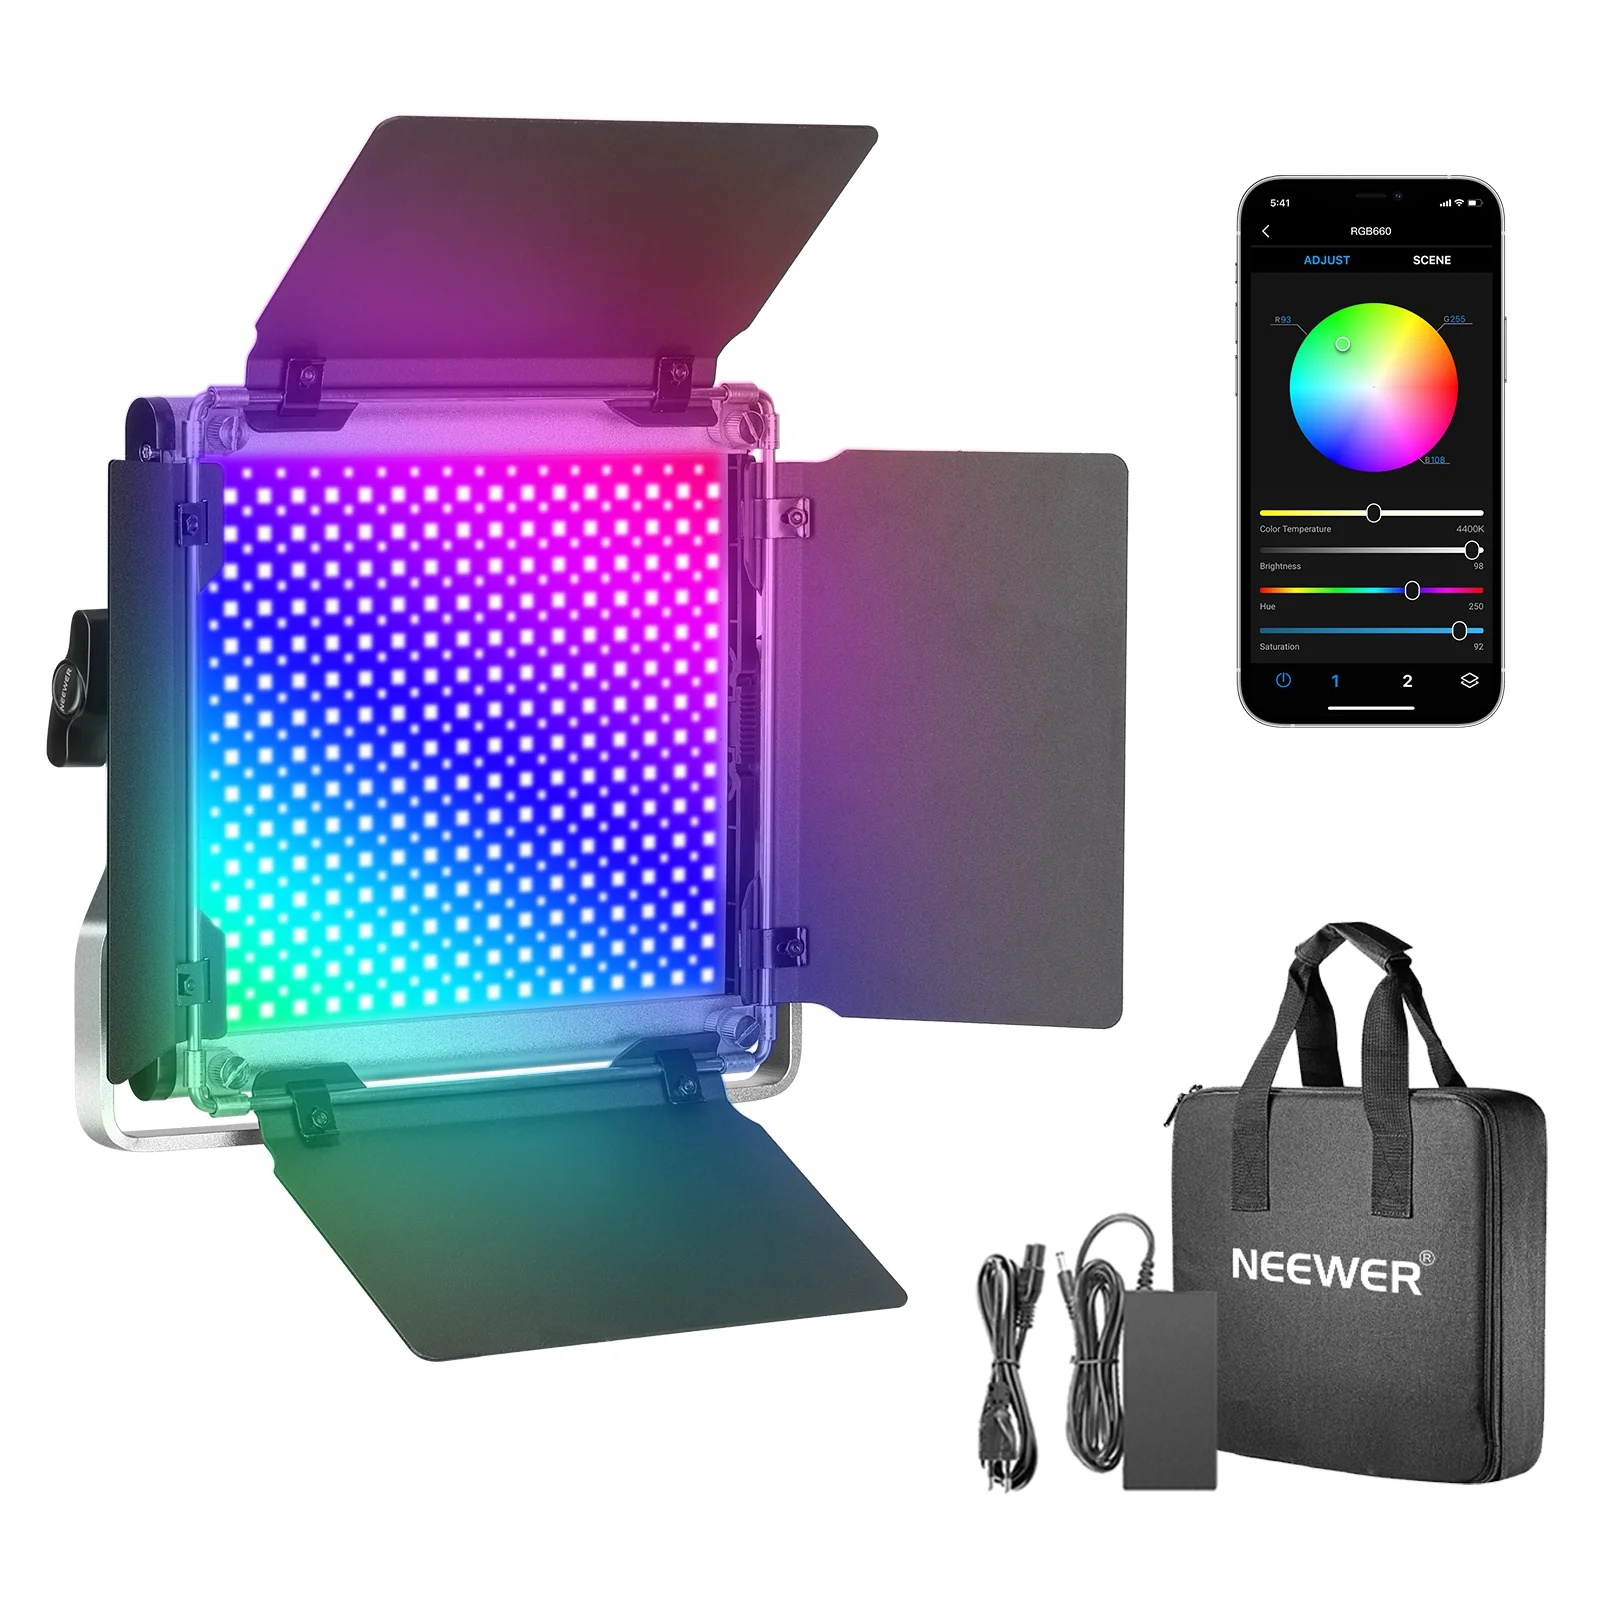 

Neewer 660 RGB Led Light with APP Control, 660 SMD LEDs CRI95/3200K-5600K/Brightness 0-100%/0-360 Adjustable Colors/9 Applicable